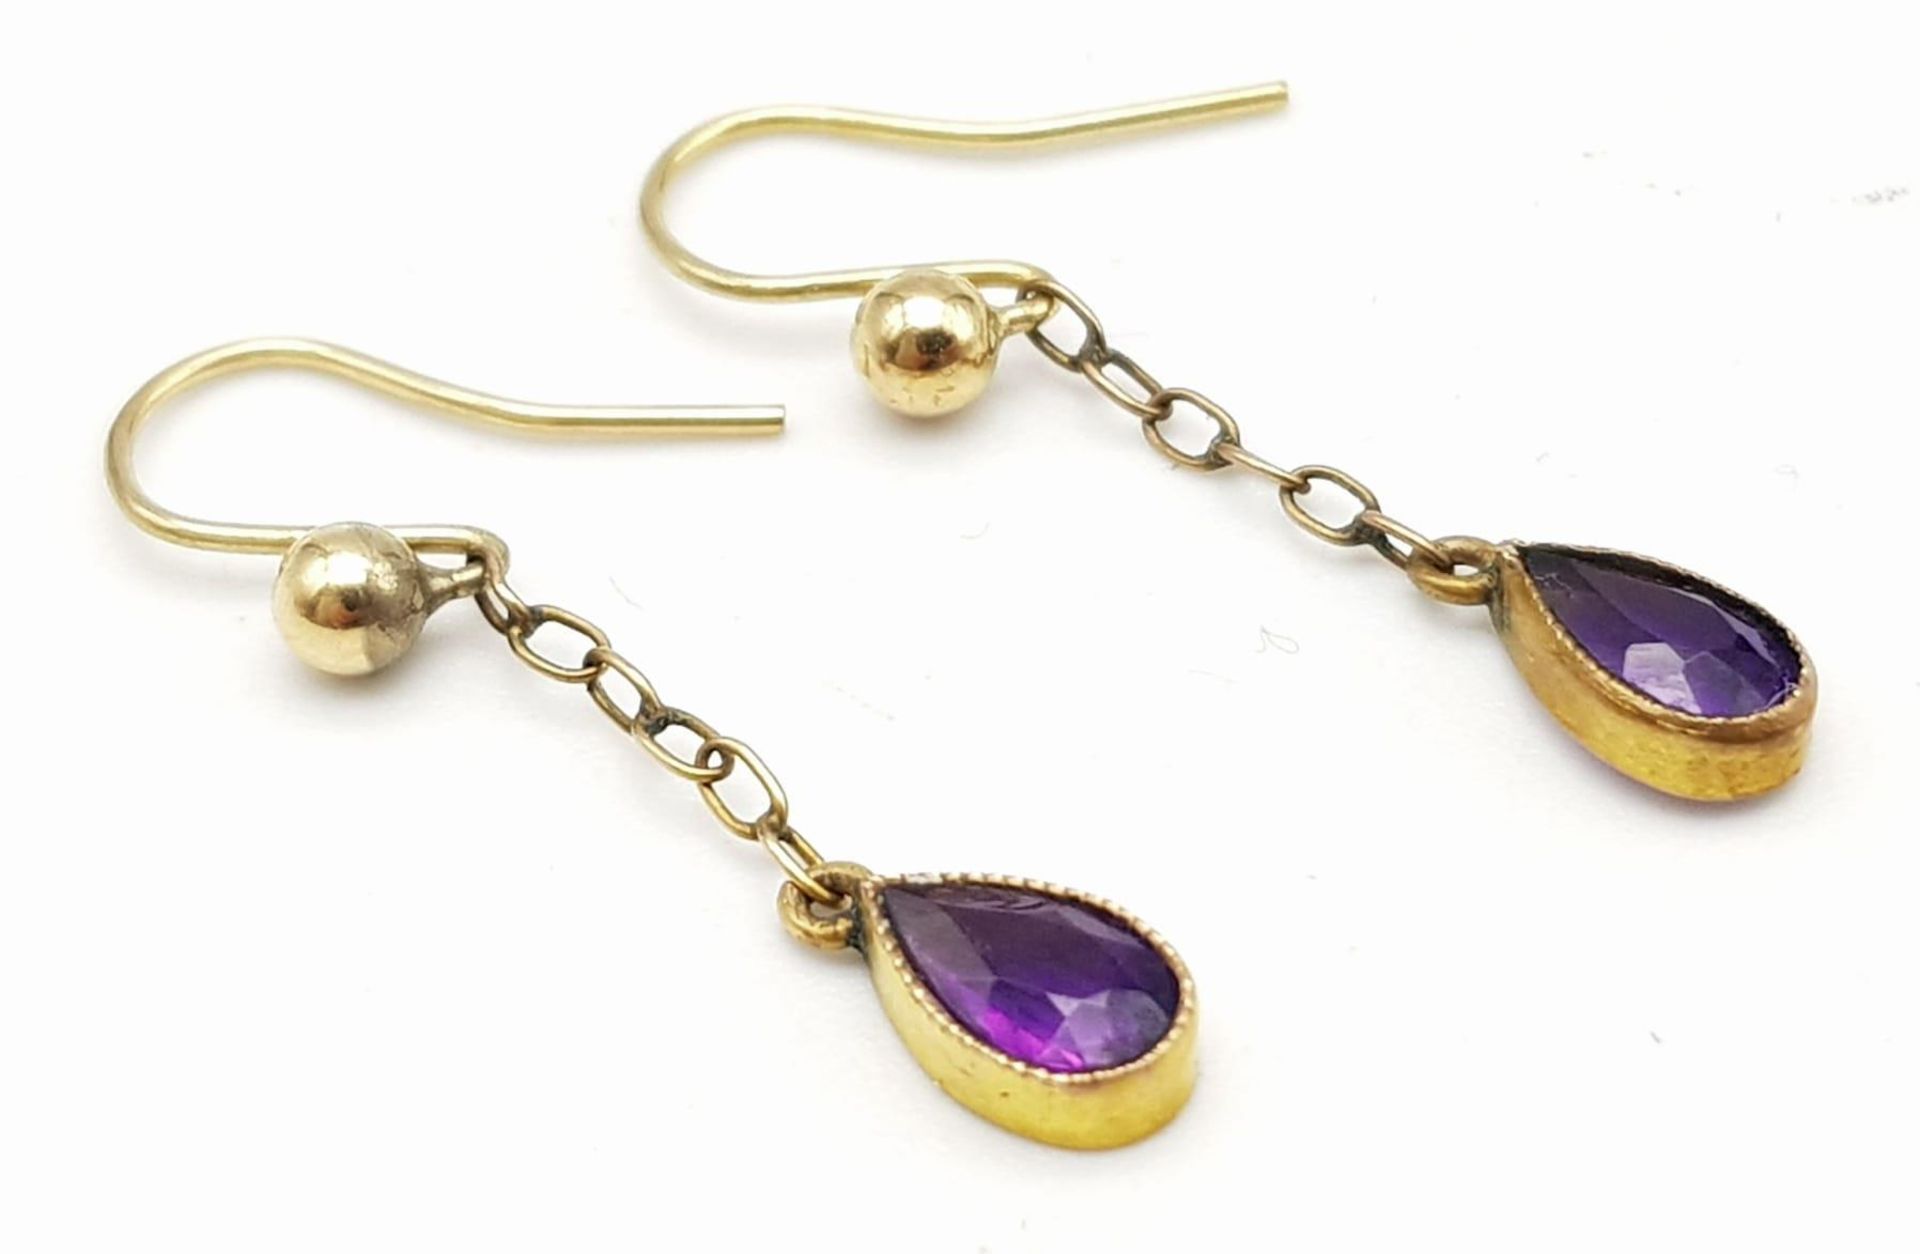 An ART NOUVEAU 9 K yellow gold pendant with vivid coloured amethysts and natural seed pearls, - Image 5 of 7